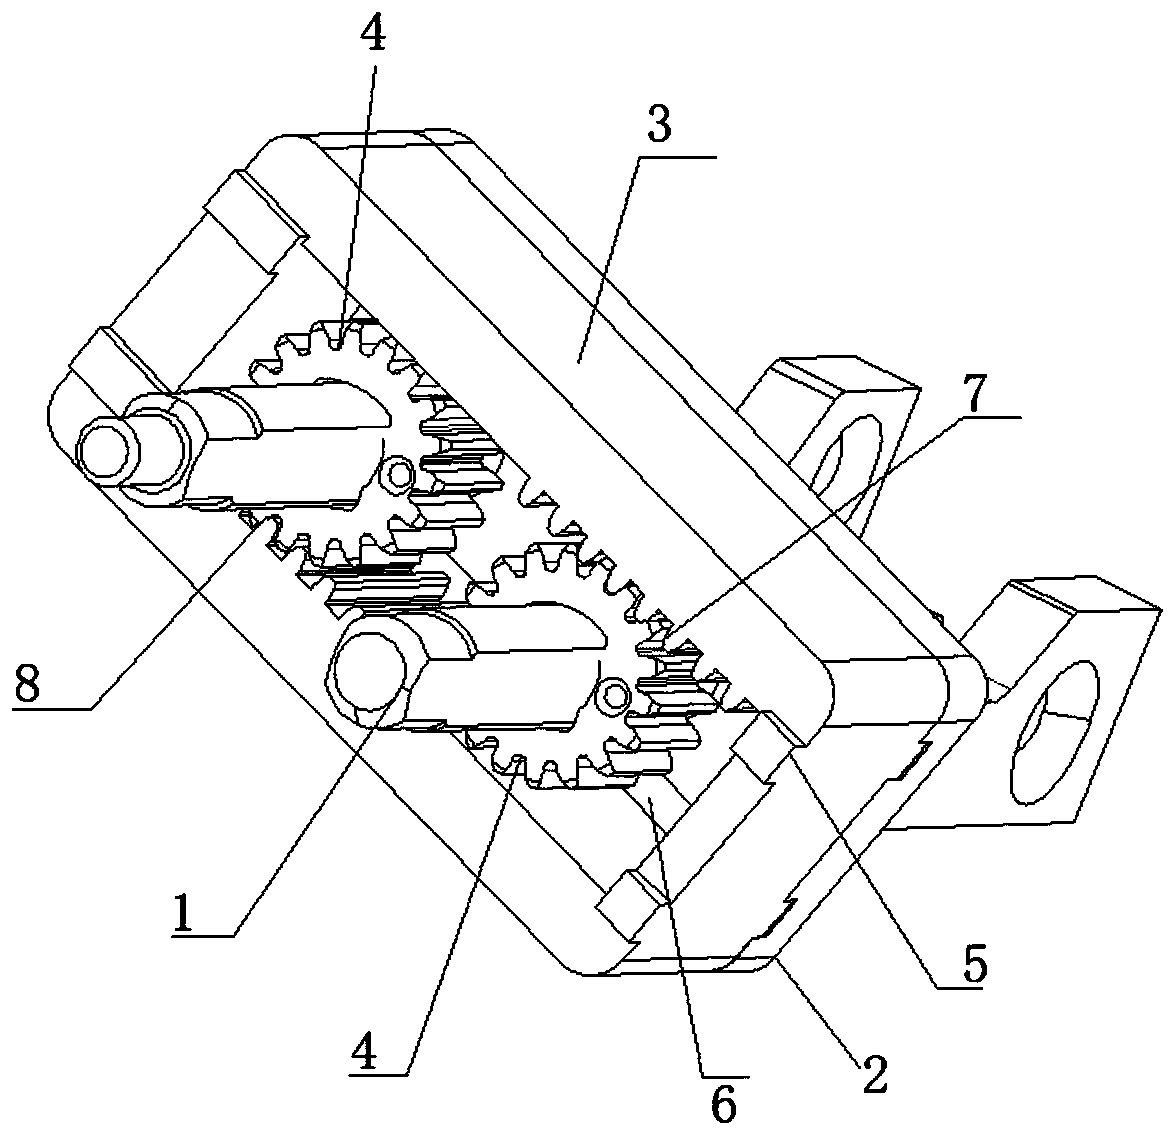 Auxiliary supporting structure provided with gear frame used for transmission and double-shaft hinge